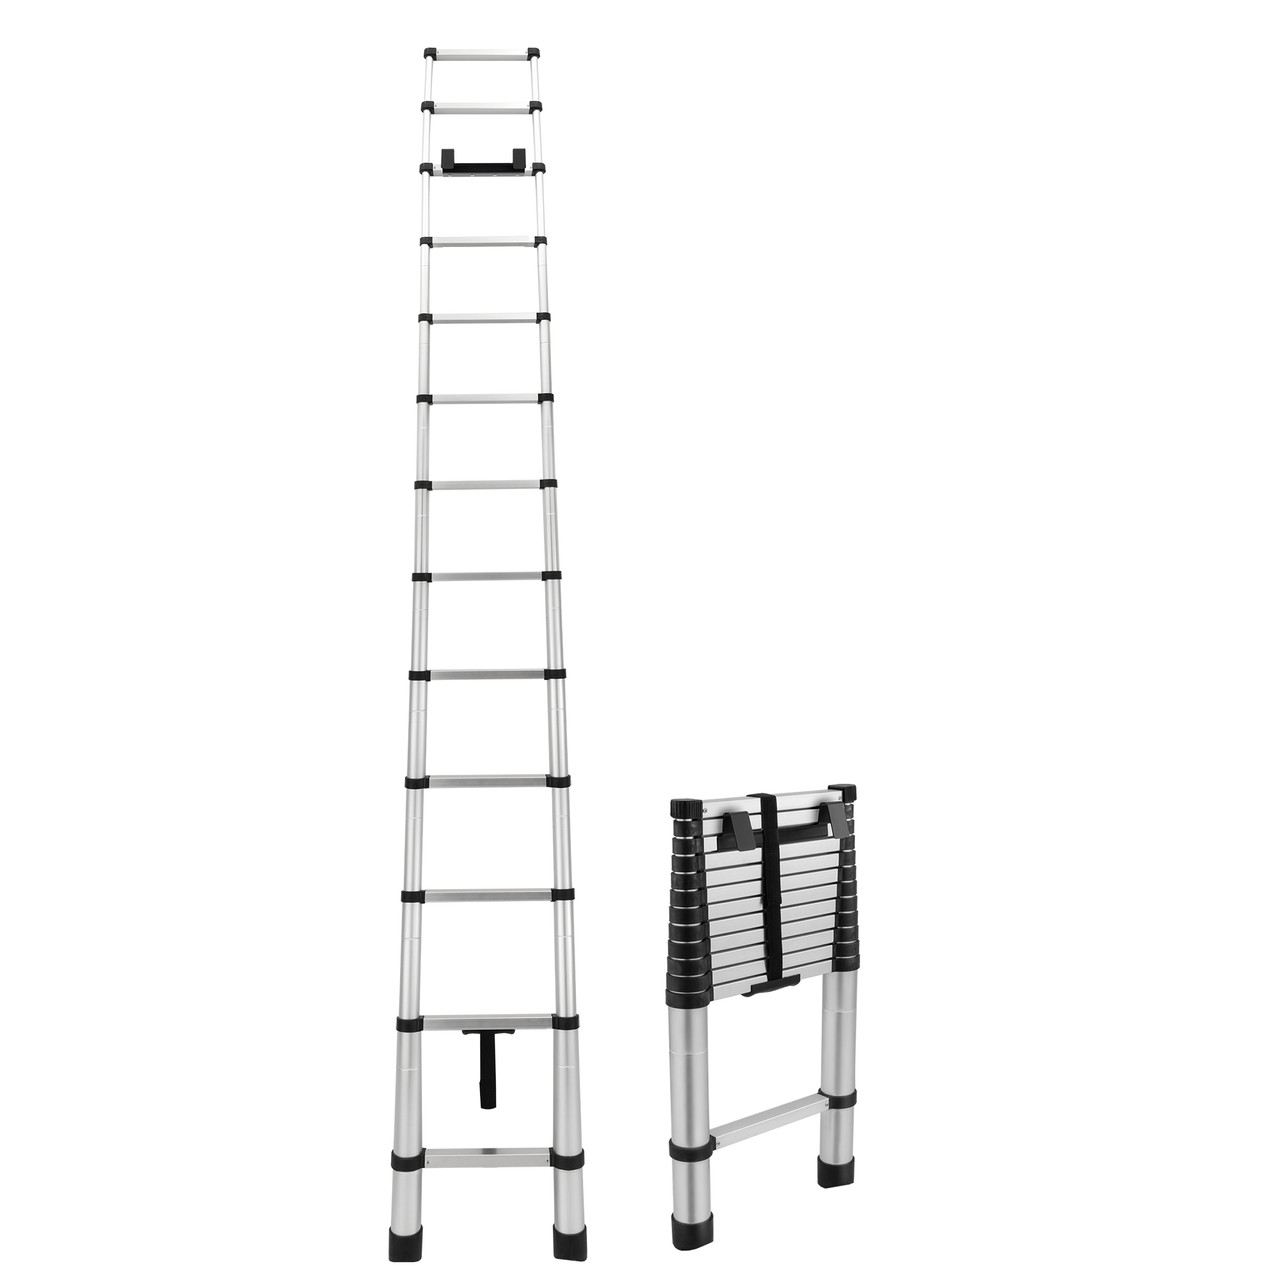 https://cdn11.bigcommerce.com/s-kwuh809851/images/stencil/1280x1280/products/3259/32083/RP-2081-134-Telescoping-Ladder-Ext-and-Compacted__69765.1677097702.jpg?c=2